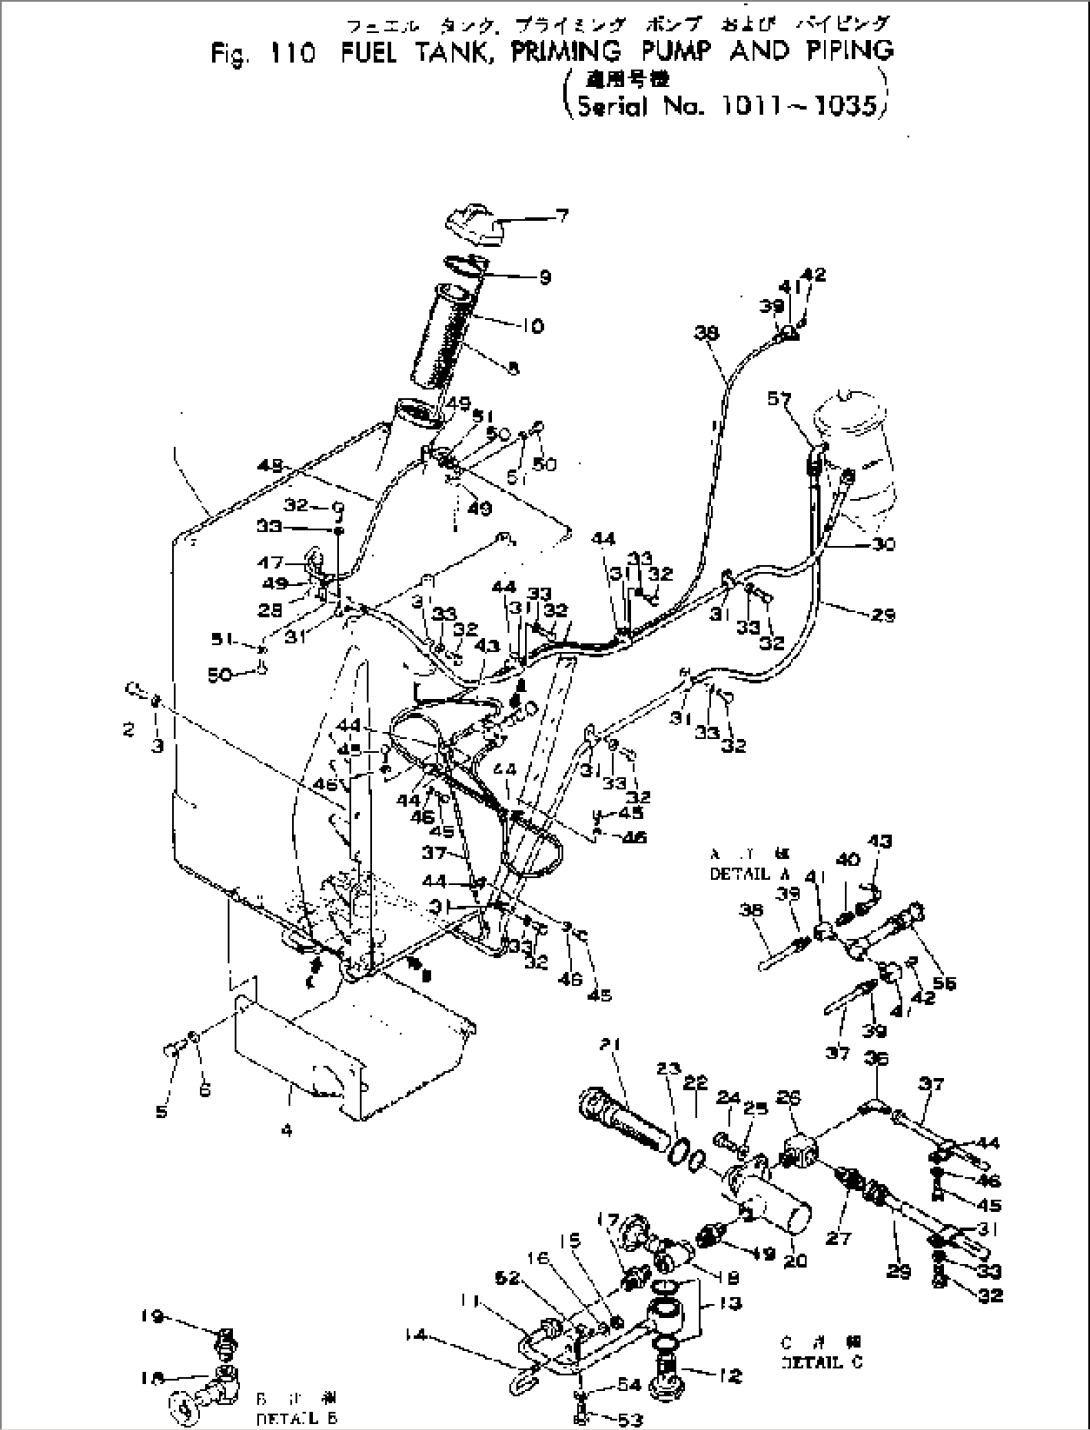 FUEL TANK¤ PRIMING PUMP AND PIPING(#1011-1035)